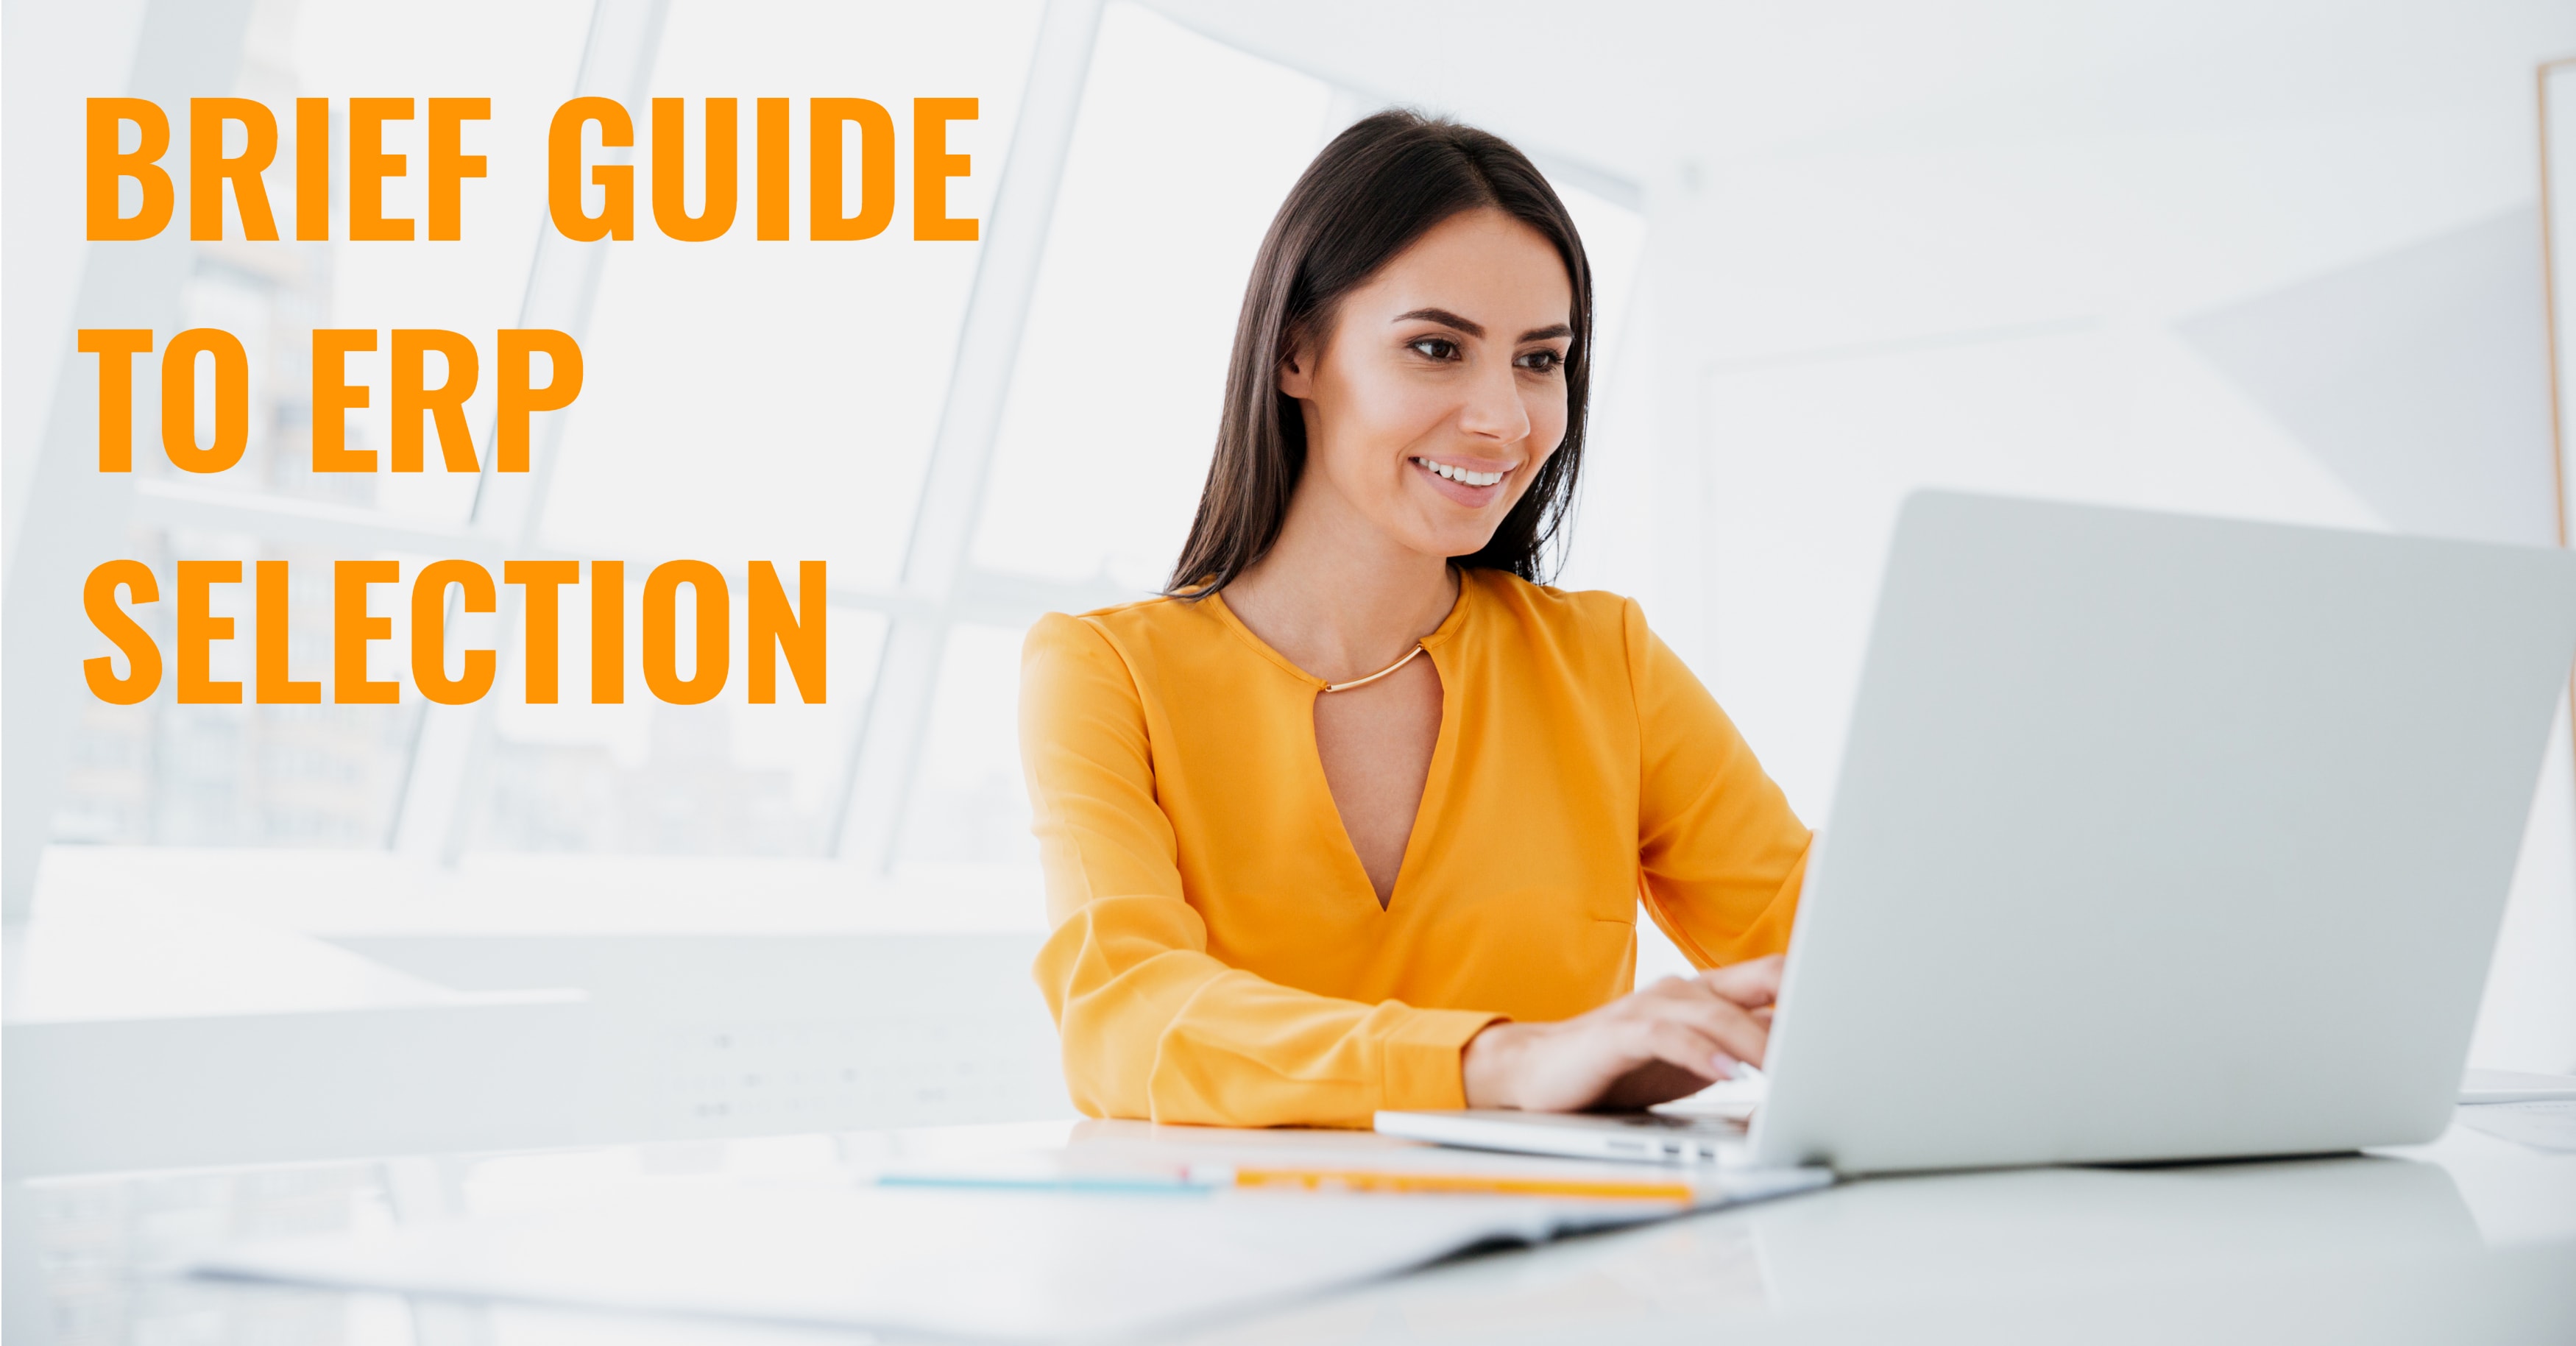 A Brief Guide to ERP Selection